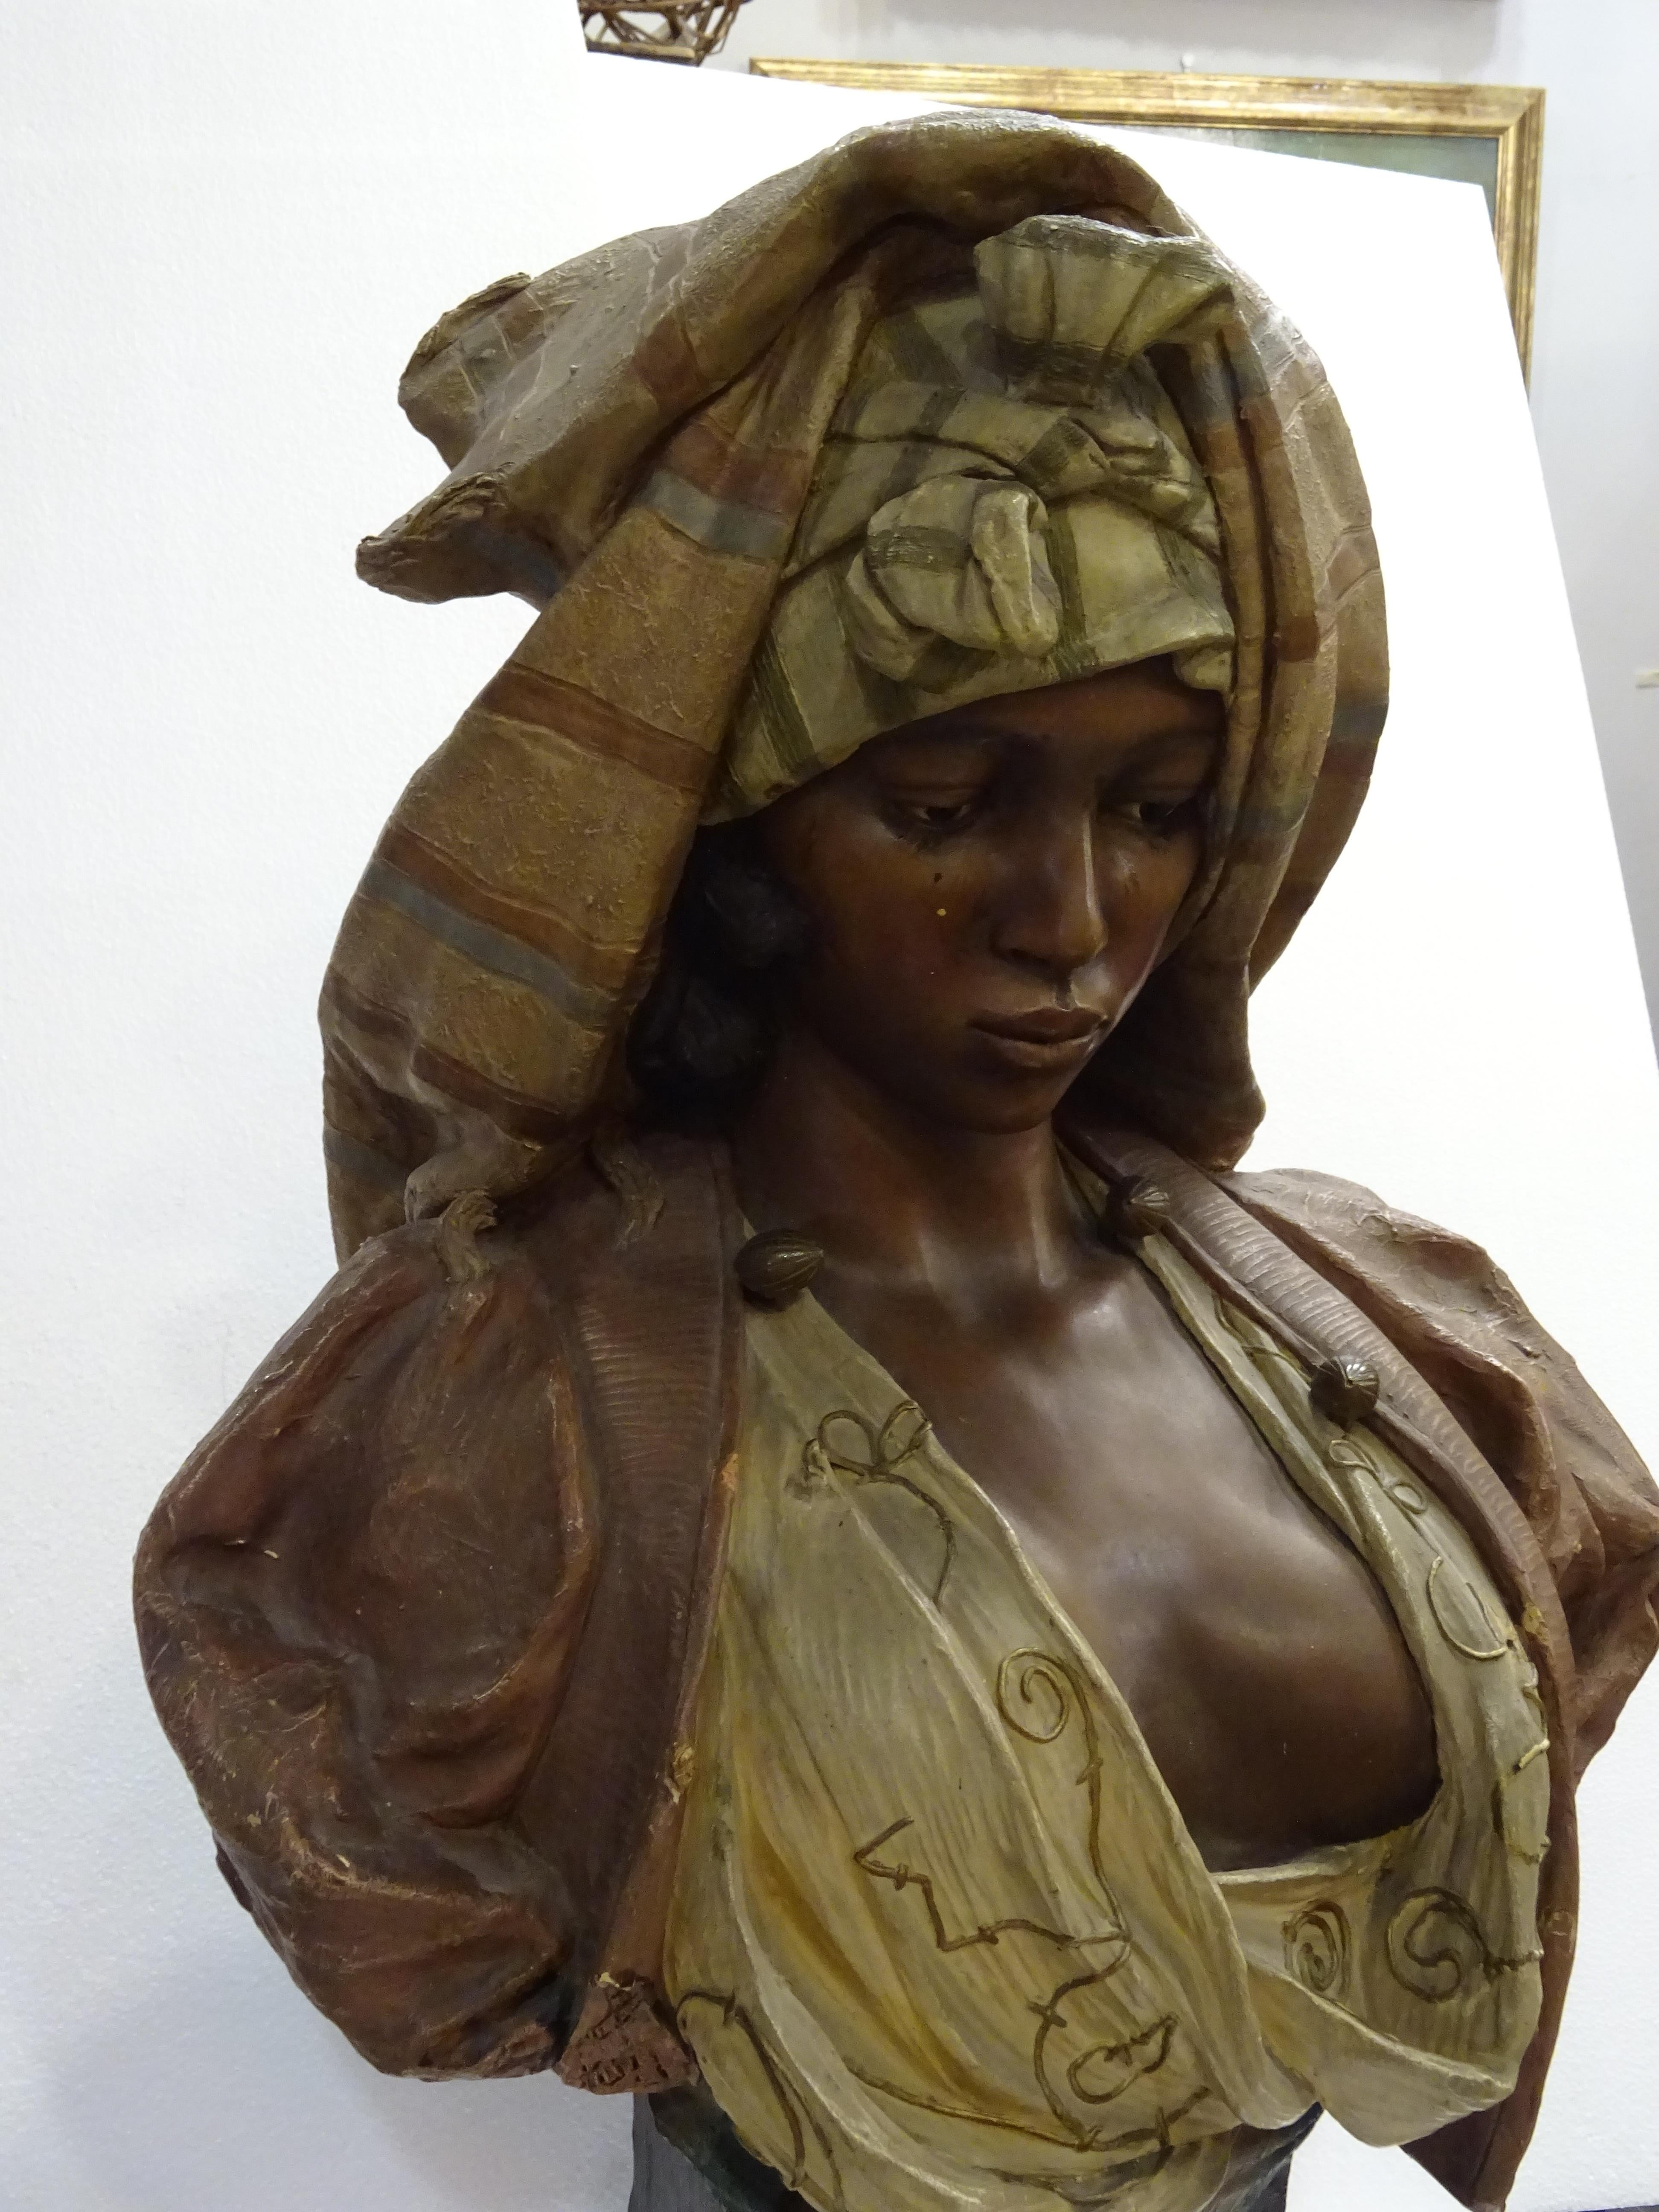 Amazing polychrome terracotta of a oriental female, signed by Friedrich Goldscheider (1845-1897)
Sculptor and factory created in 1885 in Vienna Austria, specialized in ceramics, bronze, terracotta and majolique , working on Art Nouveau and Art